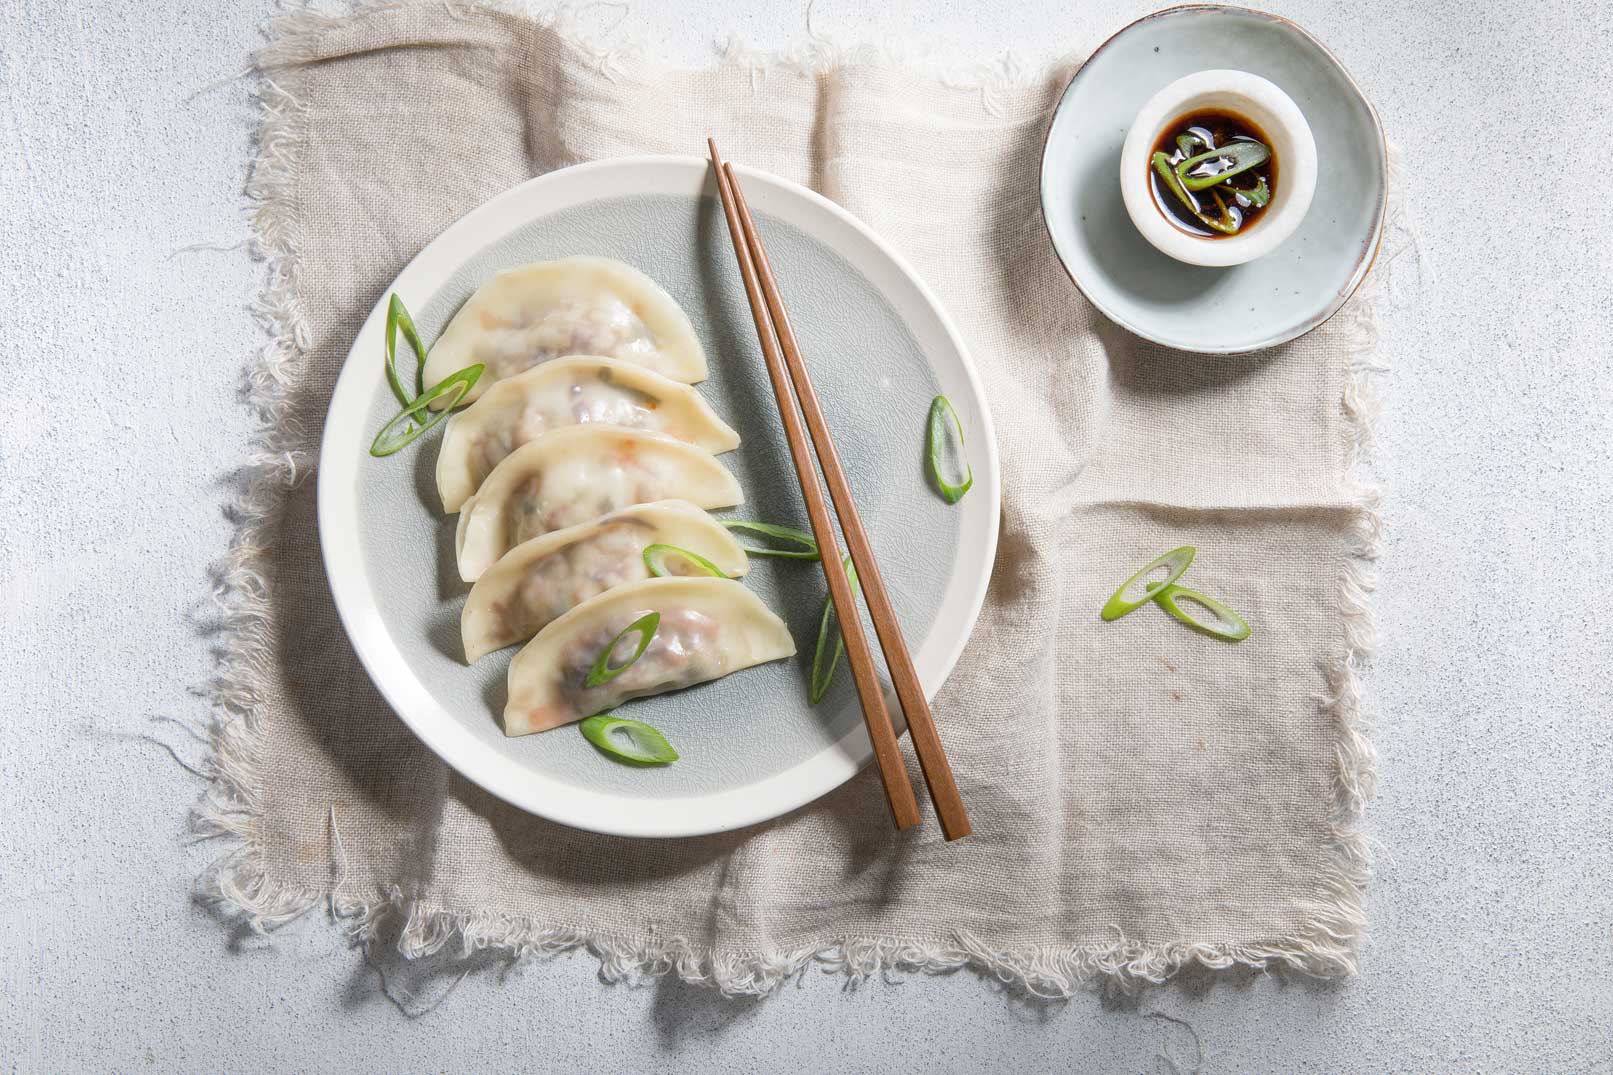 Five vegetable dumplings with sliced spring onion and wooden chopsticks on a large round plate, served on a rustic cloth napkin with a side dish of dipping sauce.